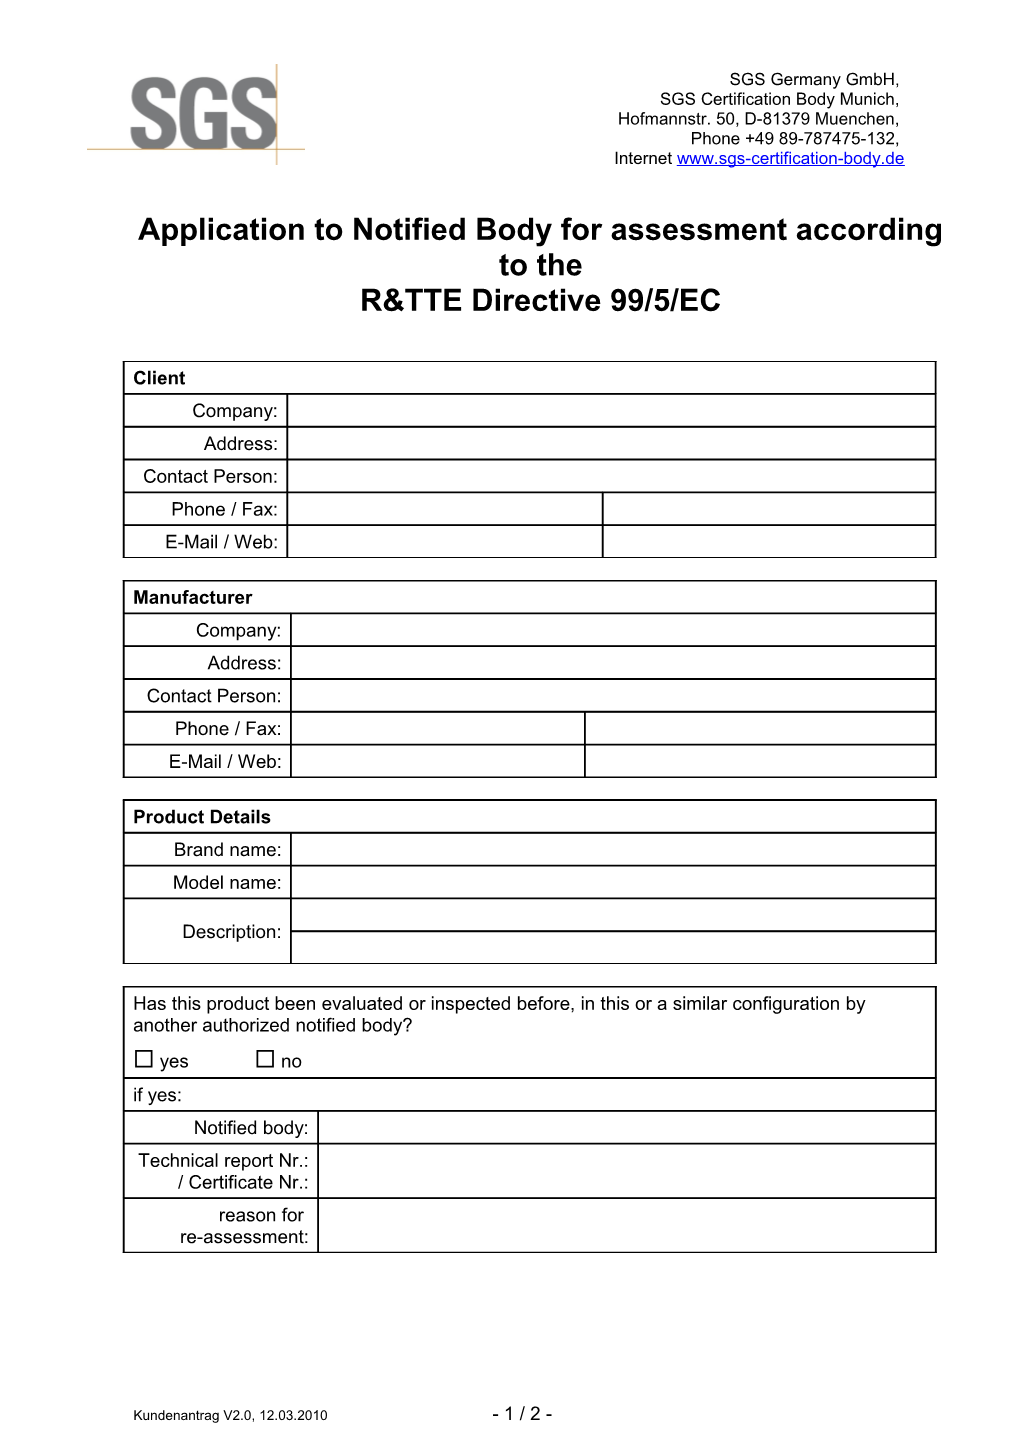 Application to Notified Body for Assessment According to The